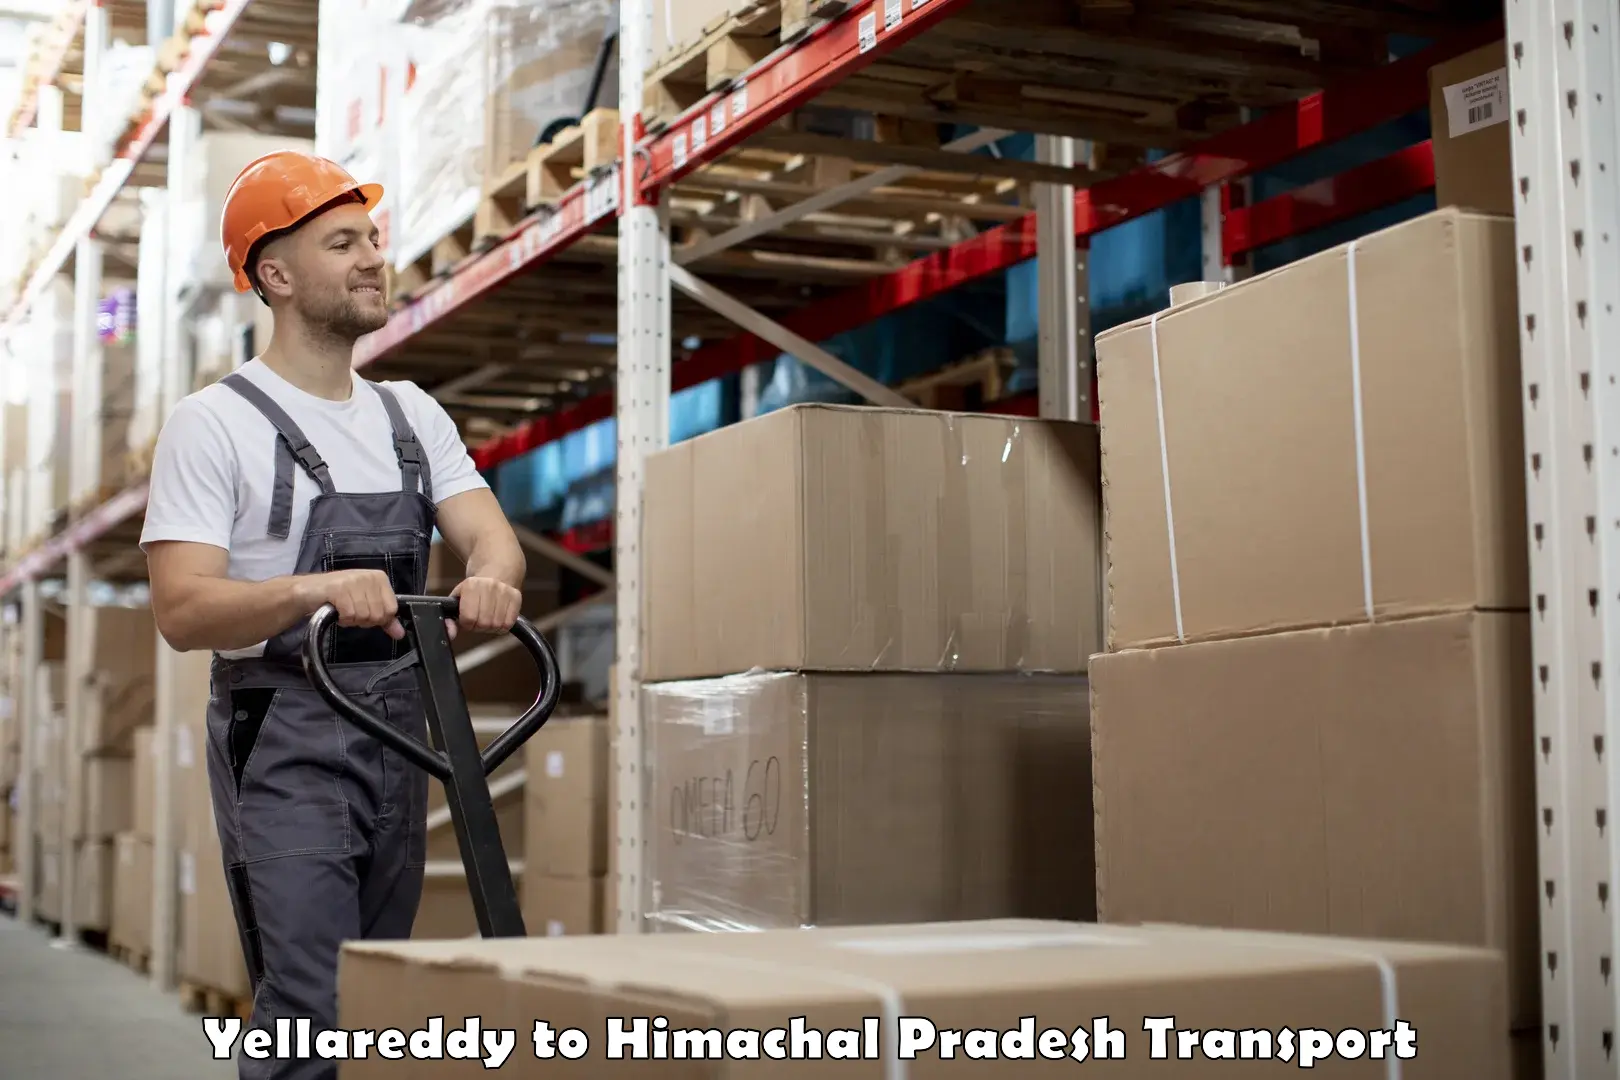 Part load transport service in India Yellareddy to Dheera